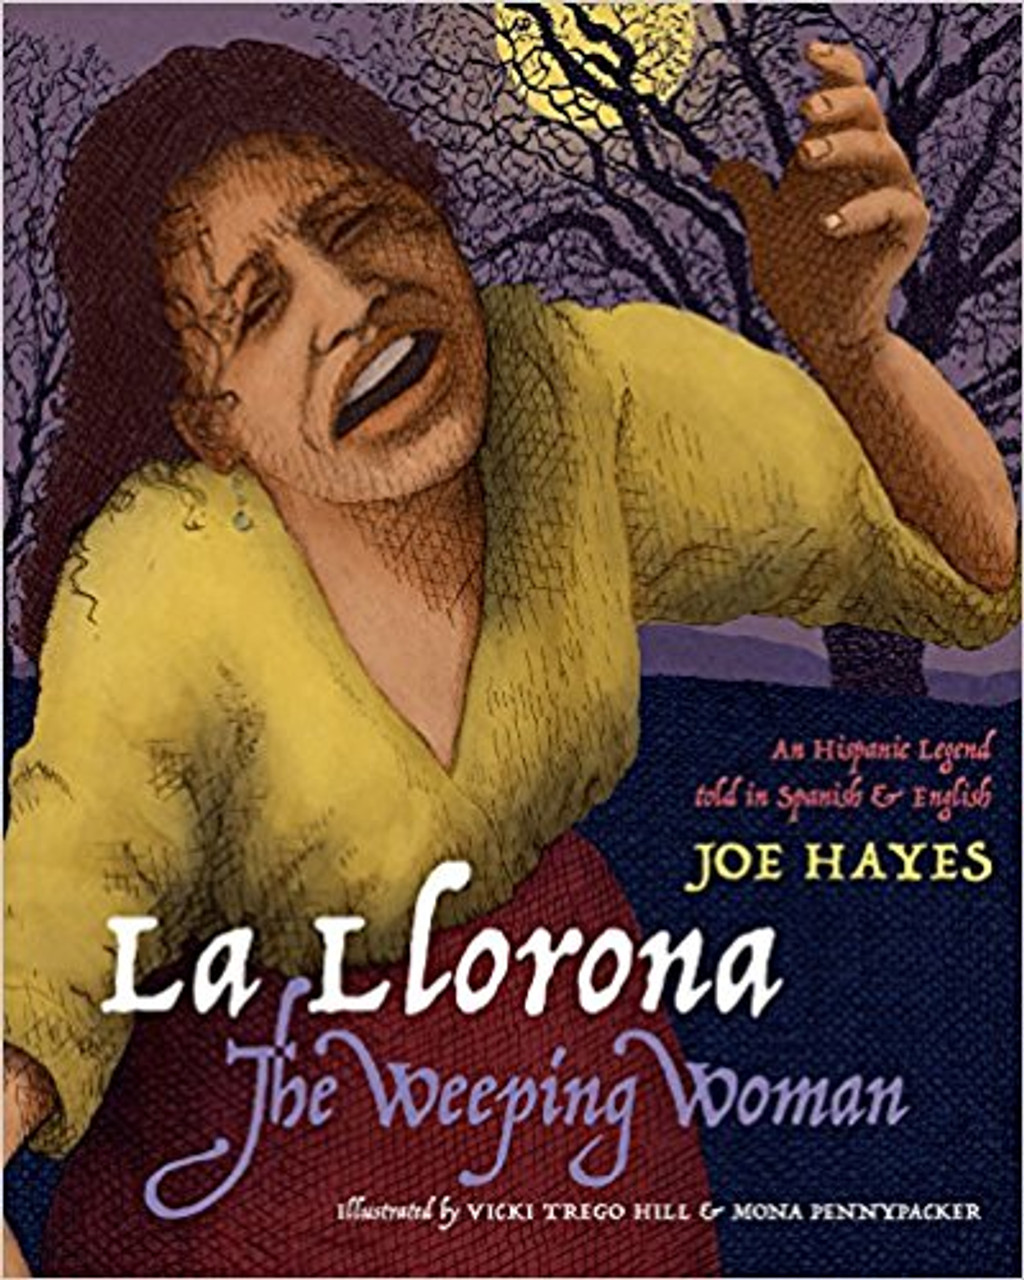 La Llorona/The Weeping Woman: An Hispanic Legend Told in Spanish and English by Joe Hayes 